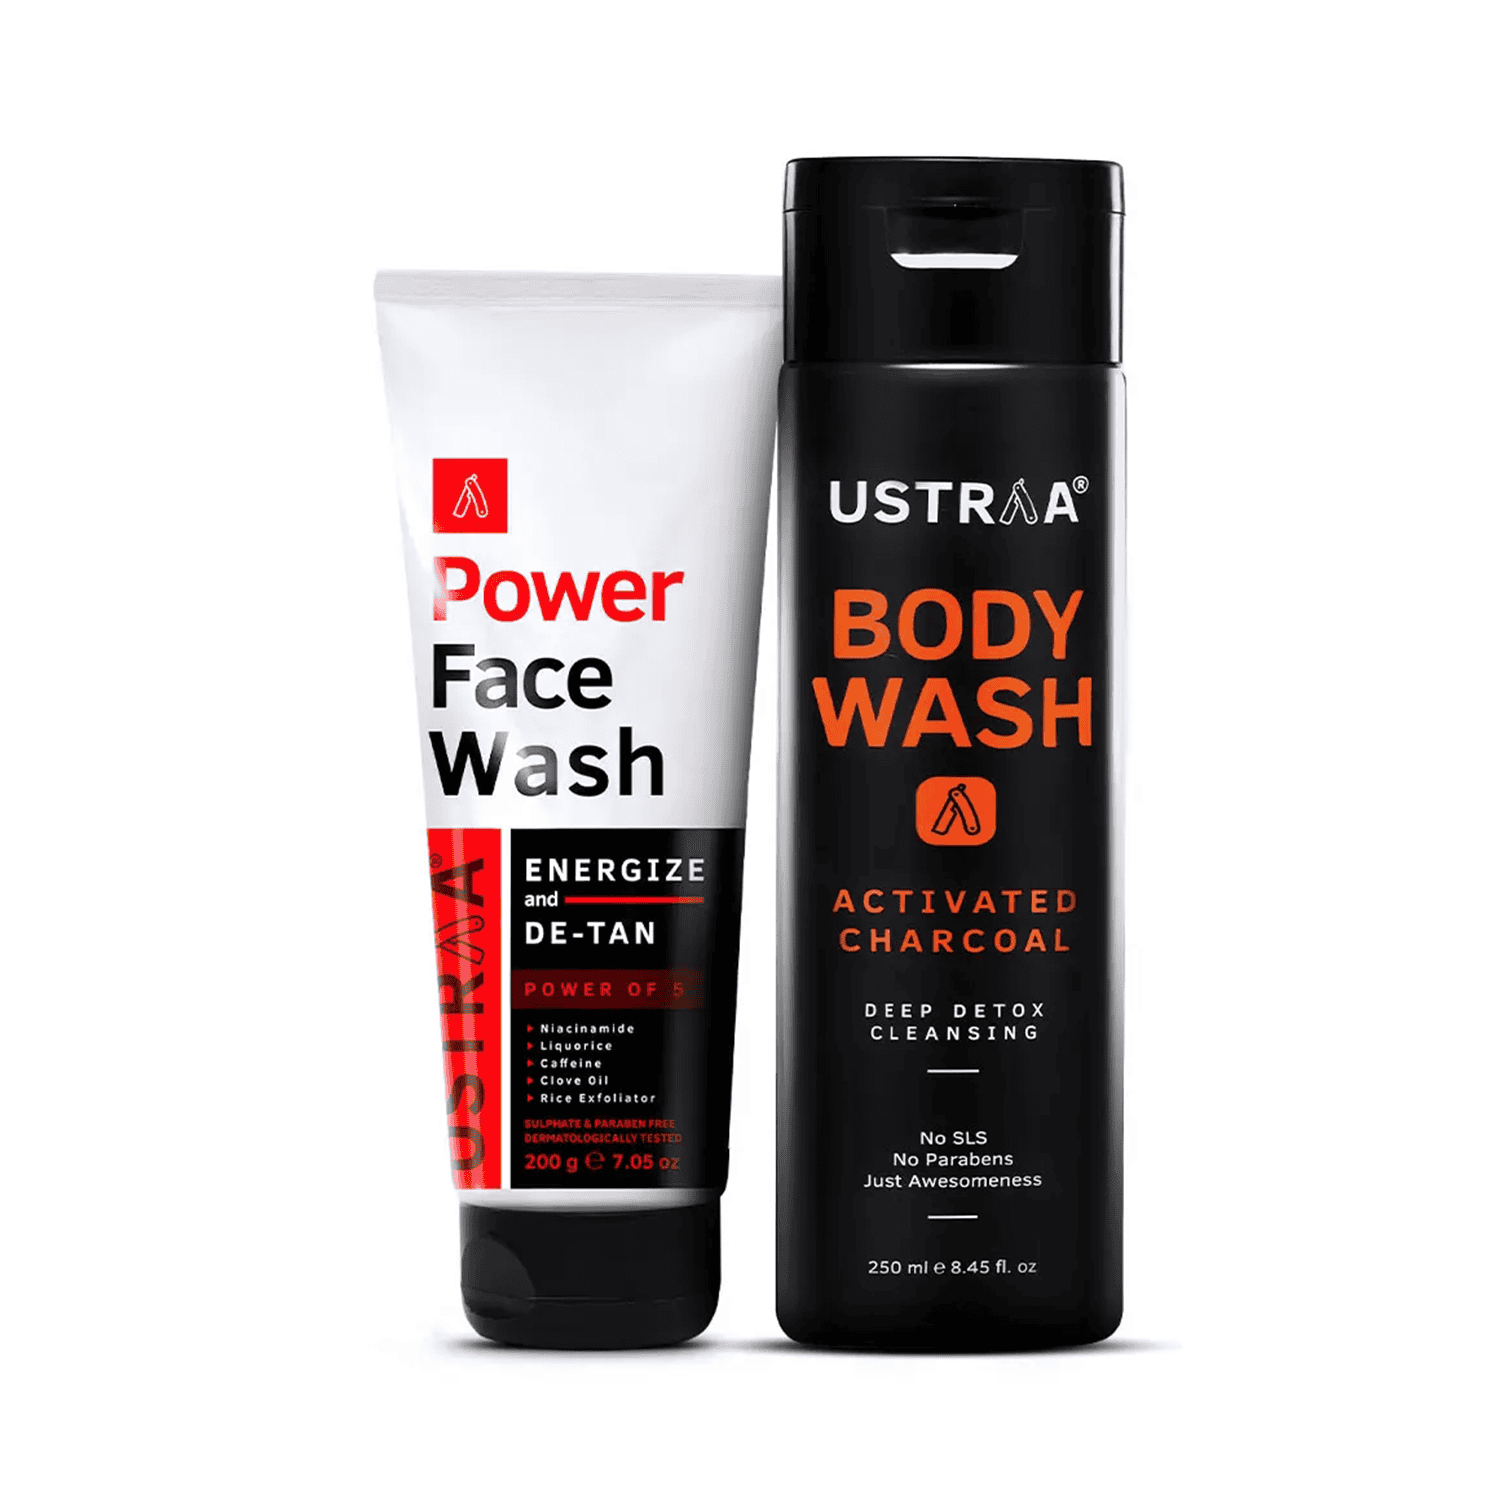 Ustraa Power Face Wash De-Tan & Activated Charcoal Body Wash